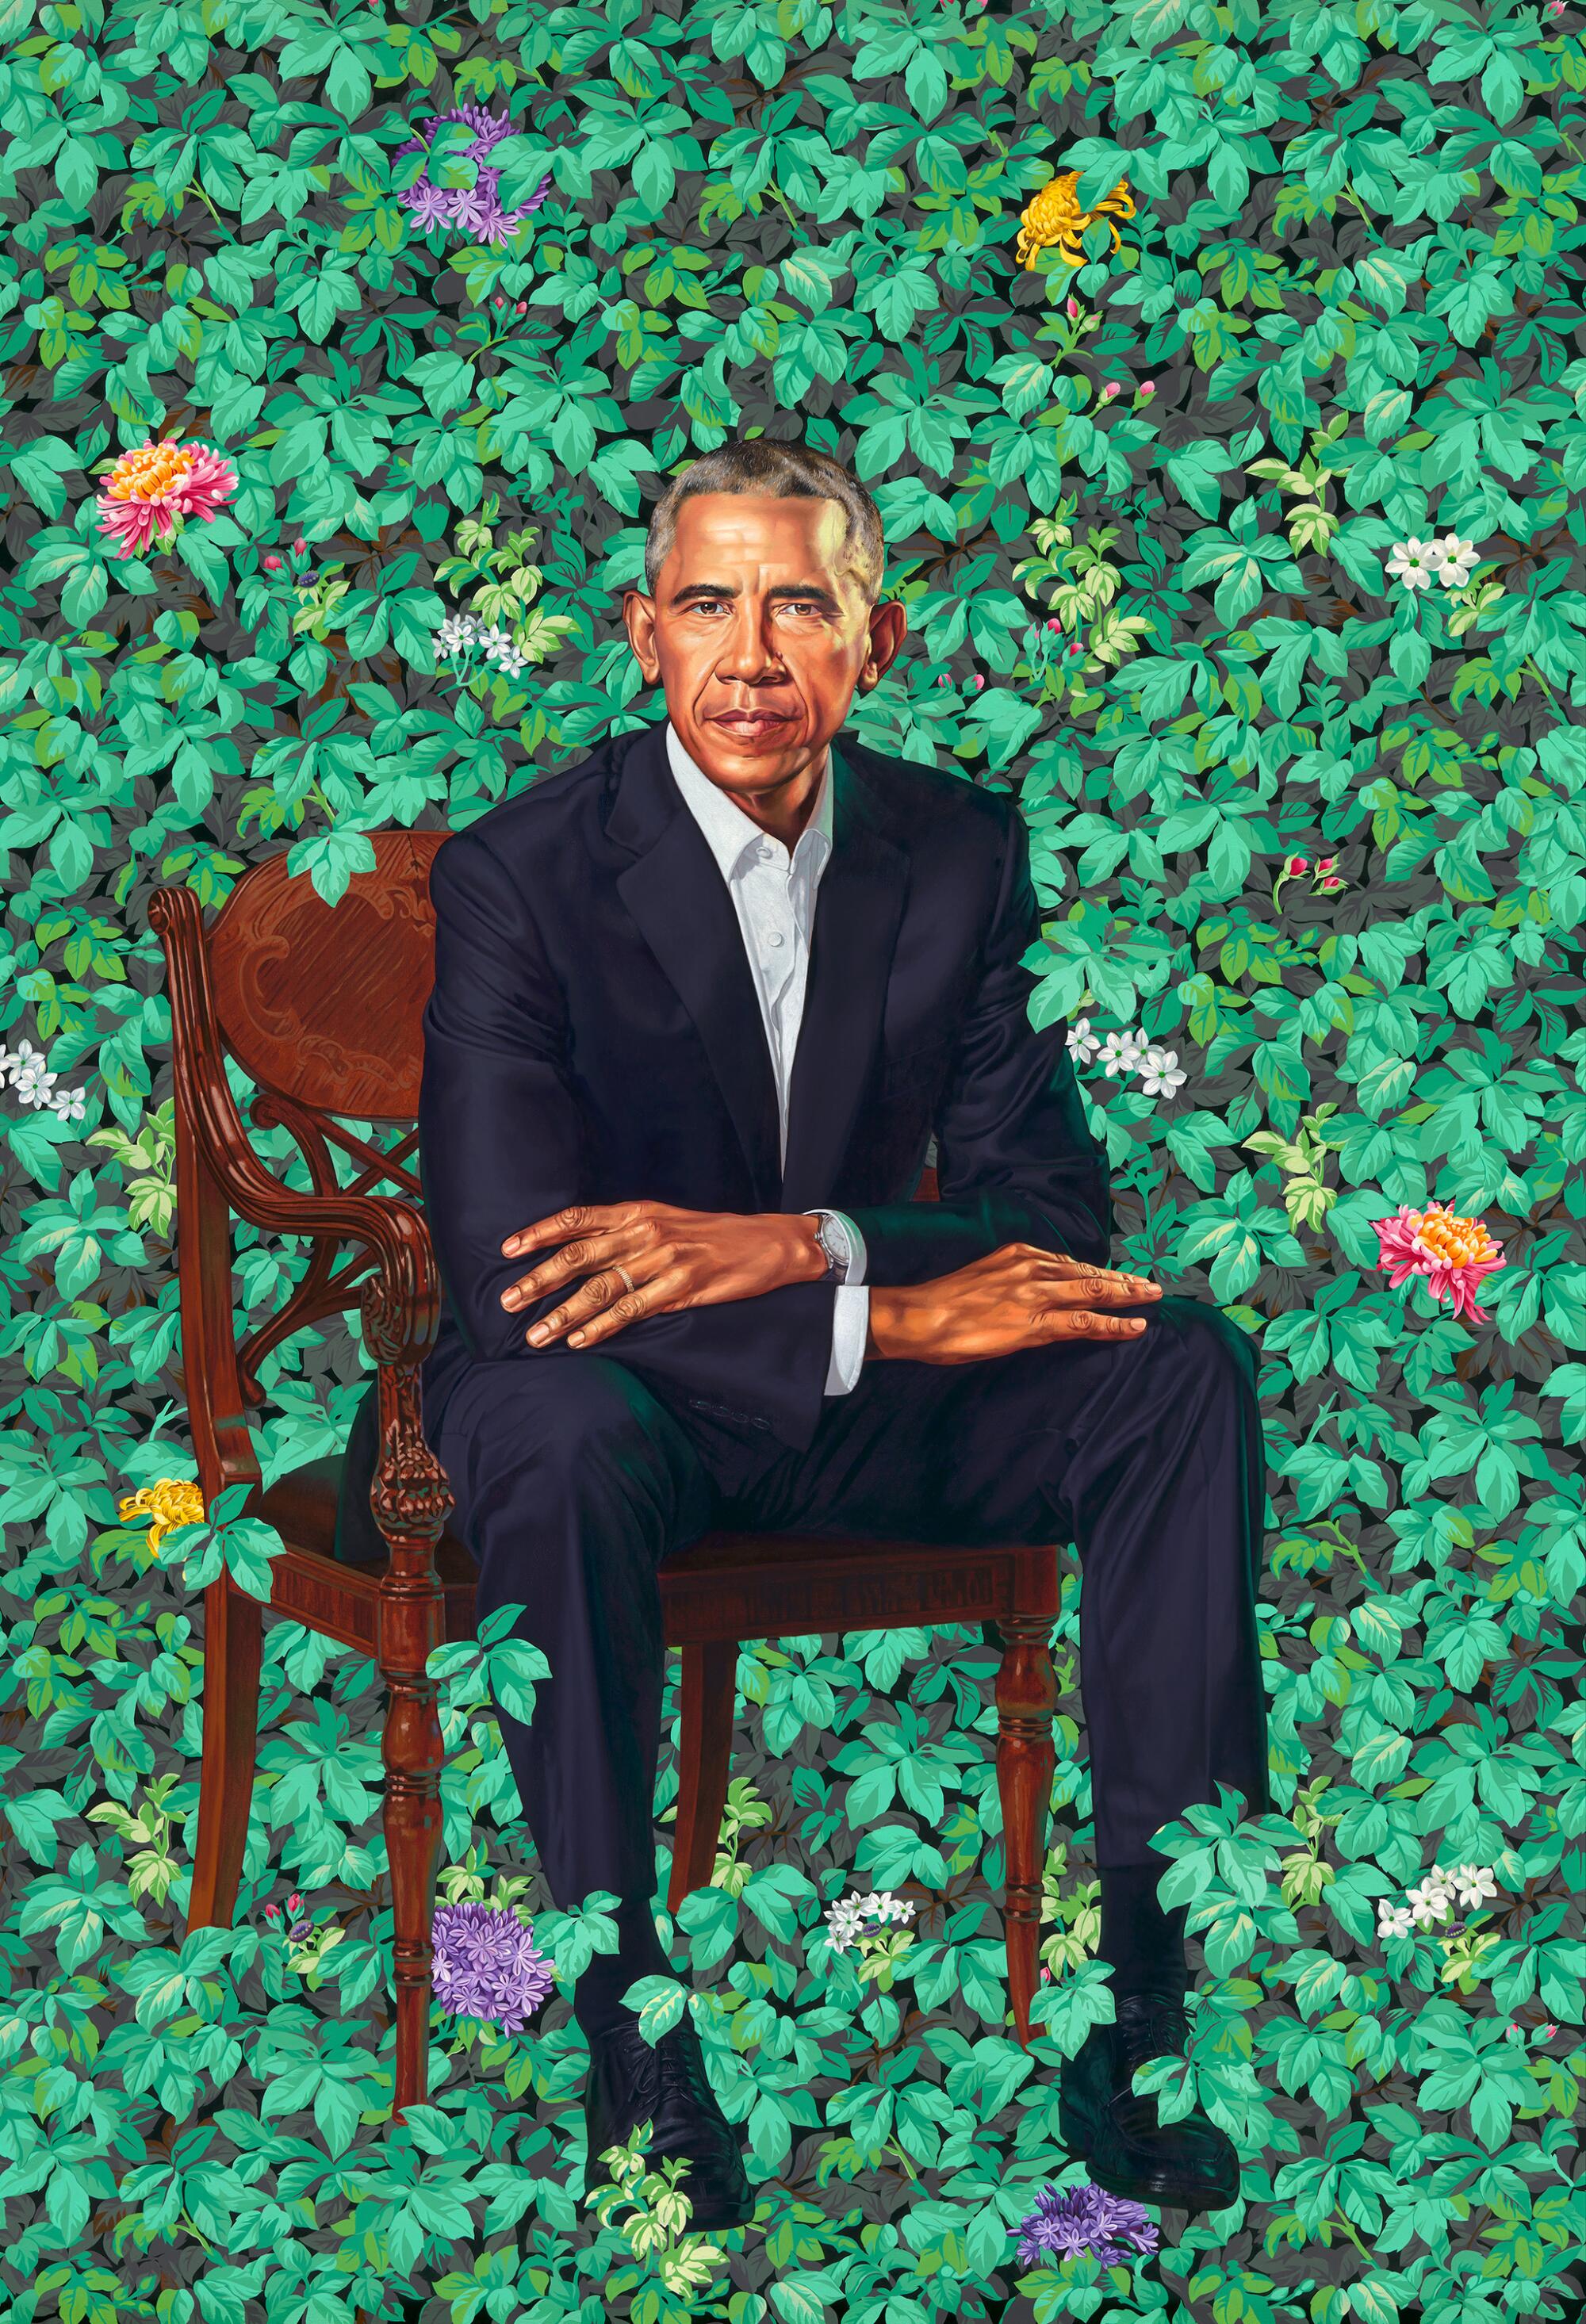 Kehinde Wiley, Barack Obama, 2018, oil on canvas, National Portrait Gallery, Smithsonian Institution ? 2018 Kehinde Wiley.